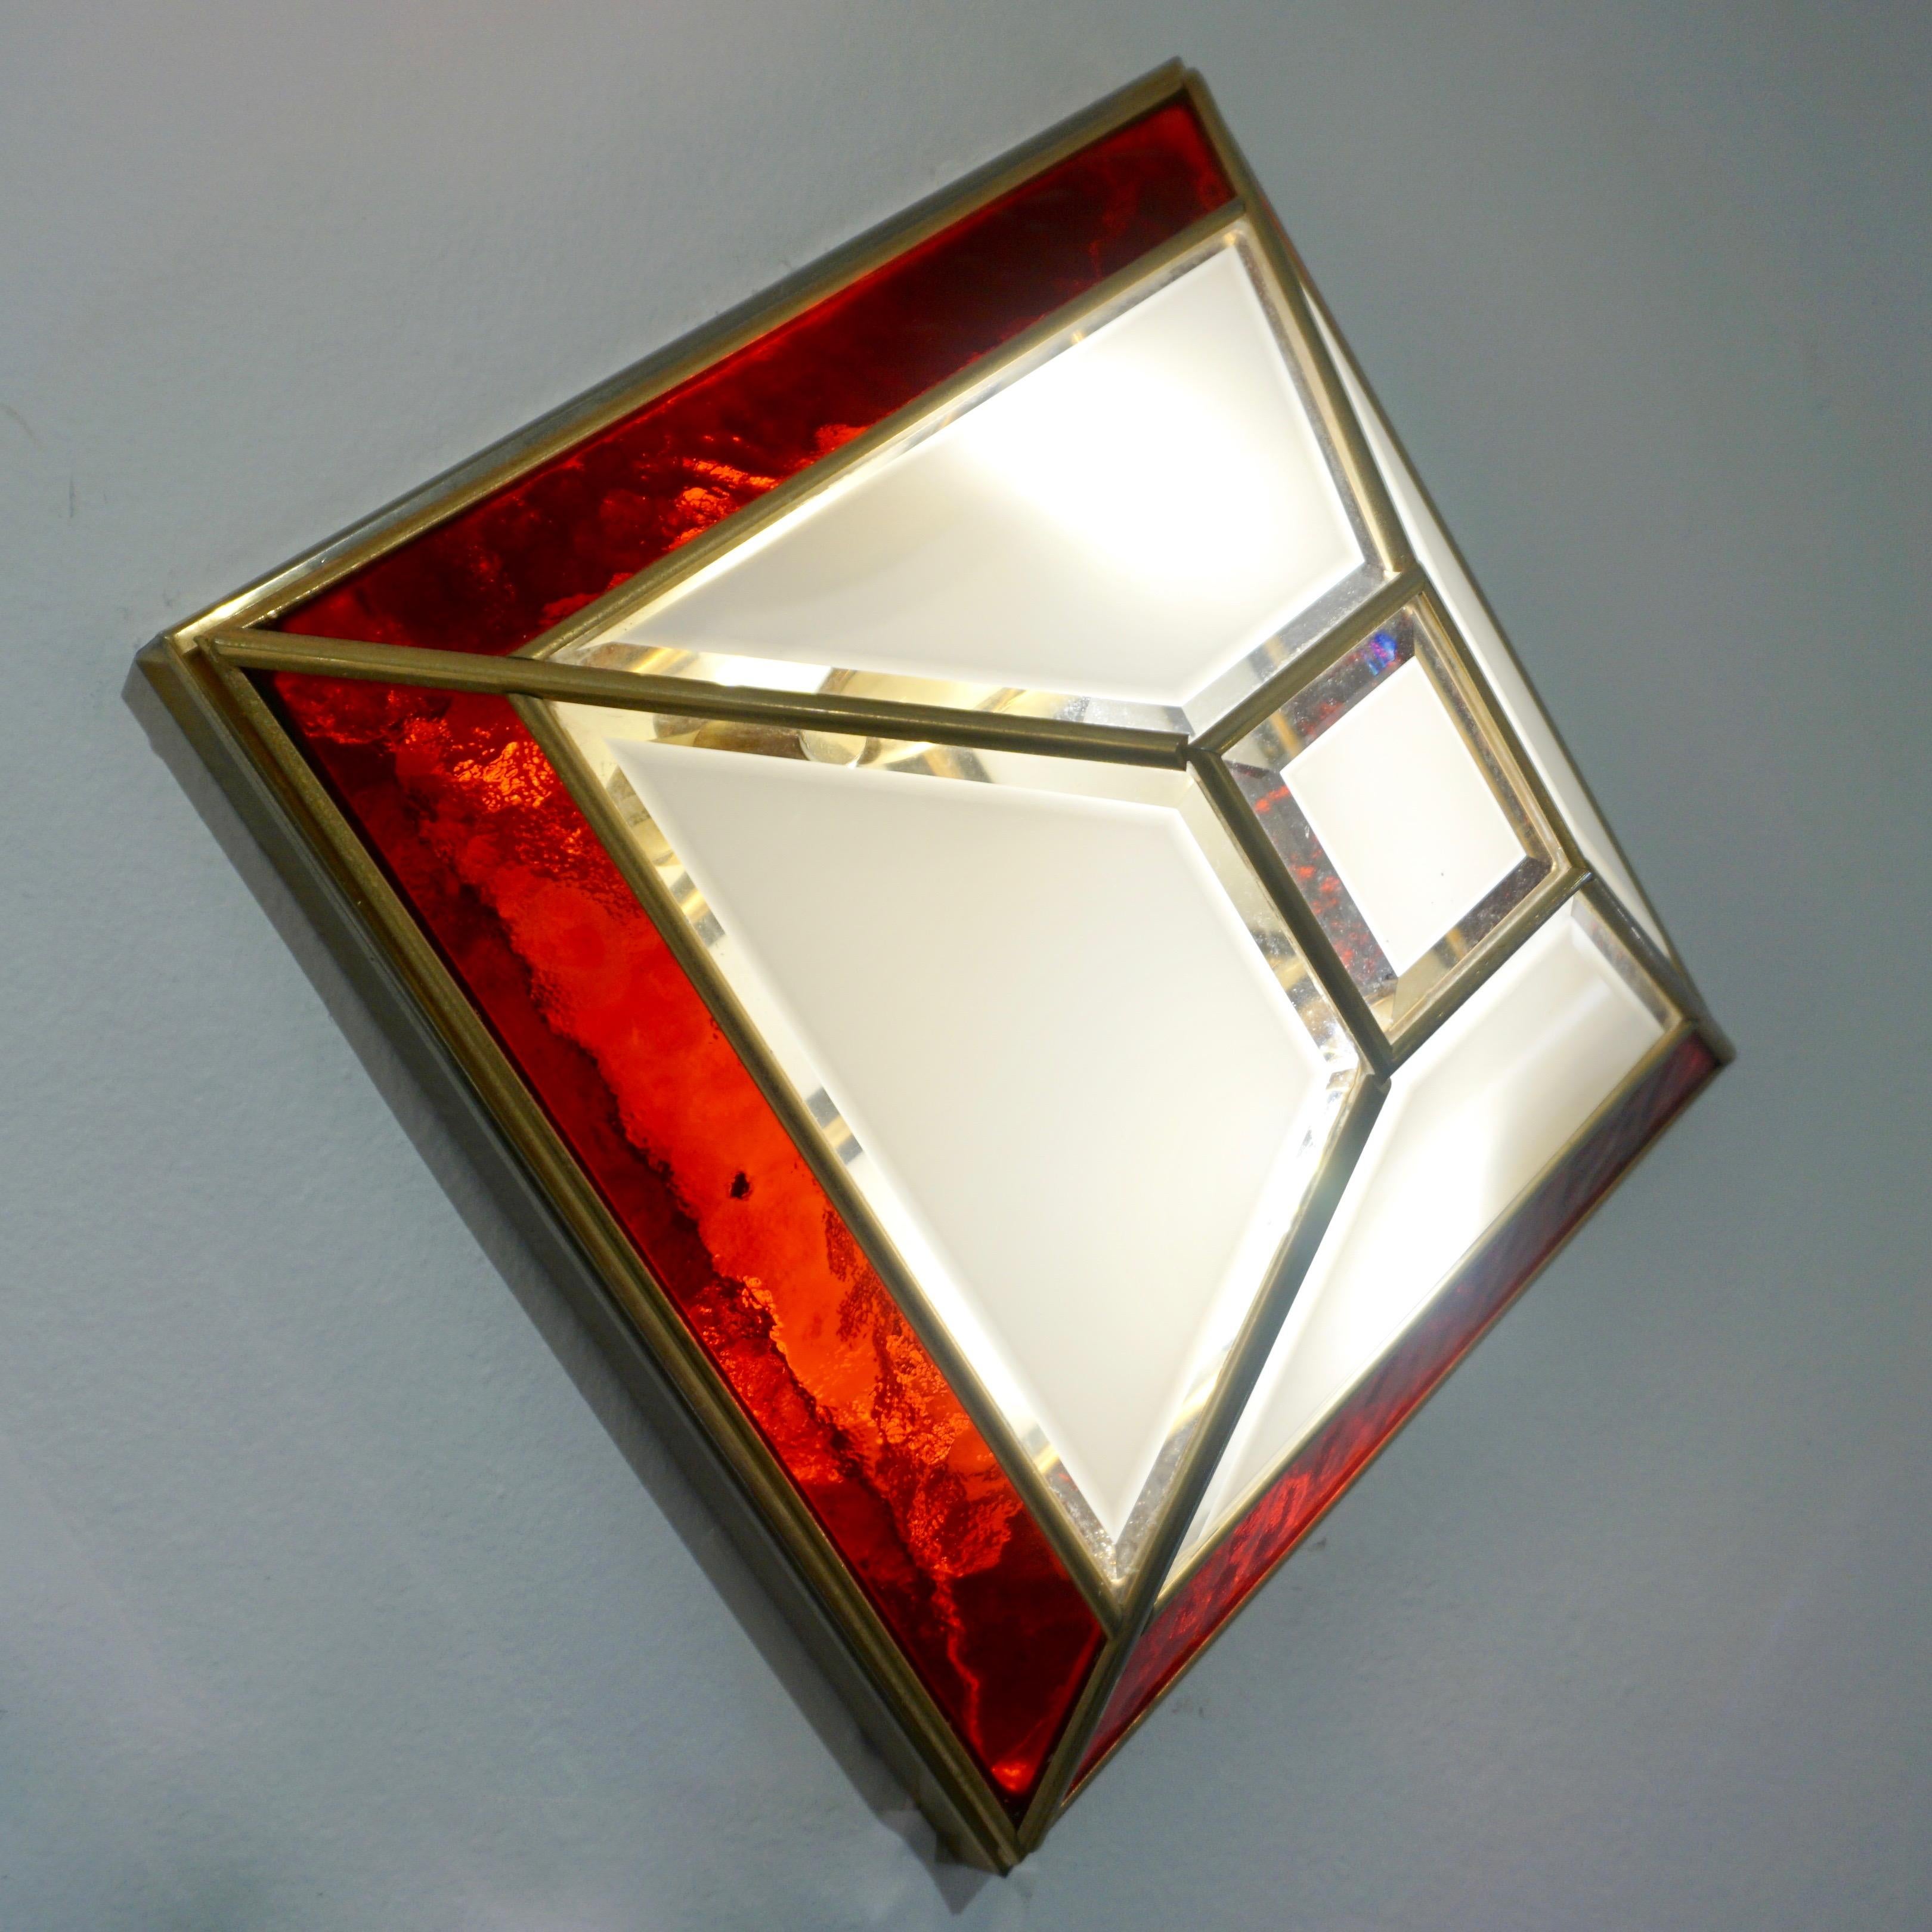 Italian 1950s Art Deco Style Pair of Red White Frosted Glass Sconces/Flushmounts 3